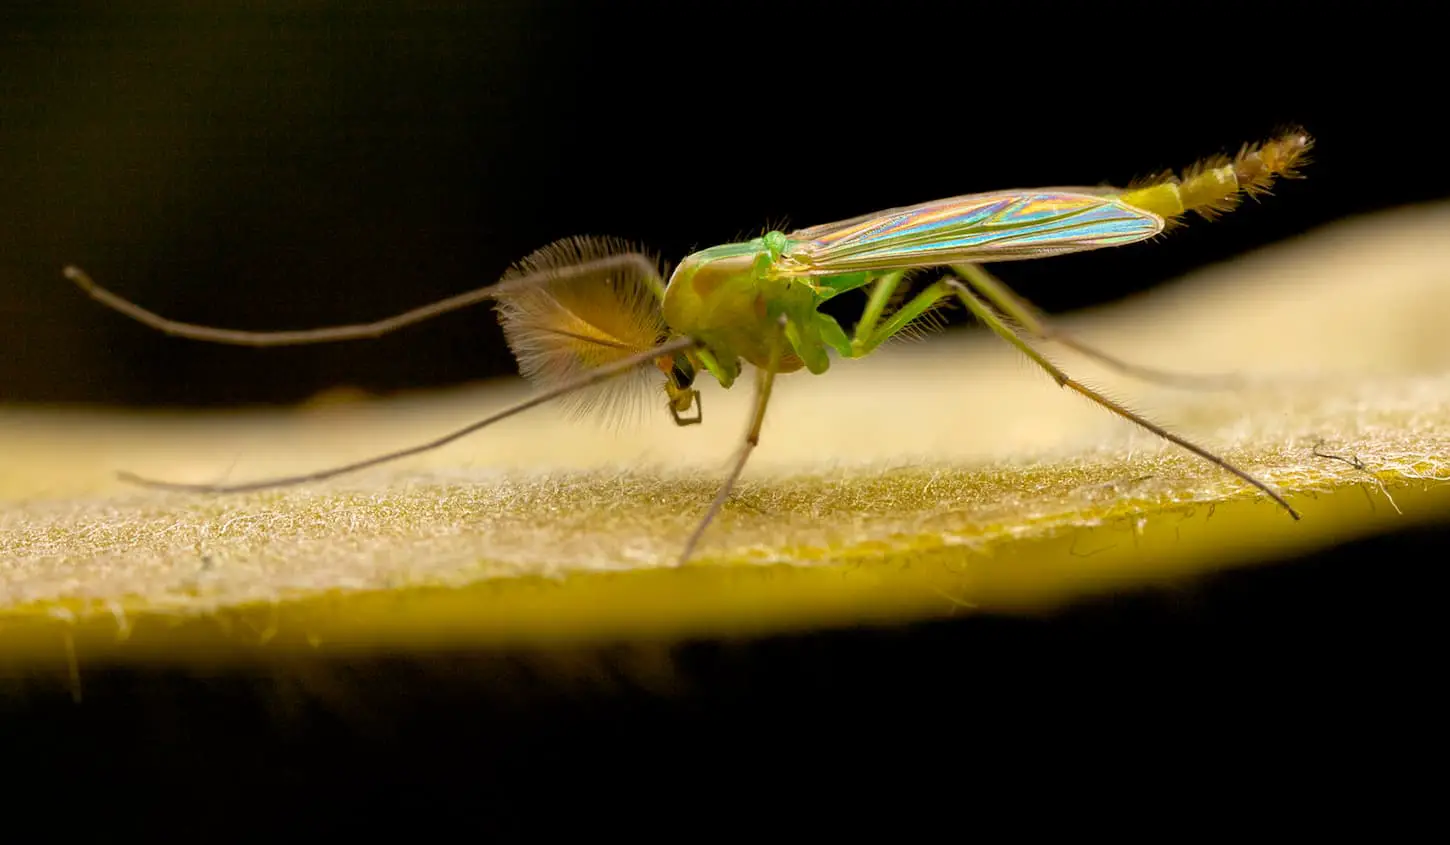 An image of a colourful midge sitting on a leaf, with black background.